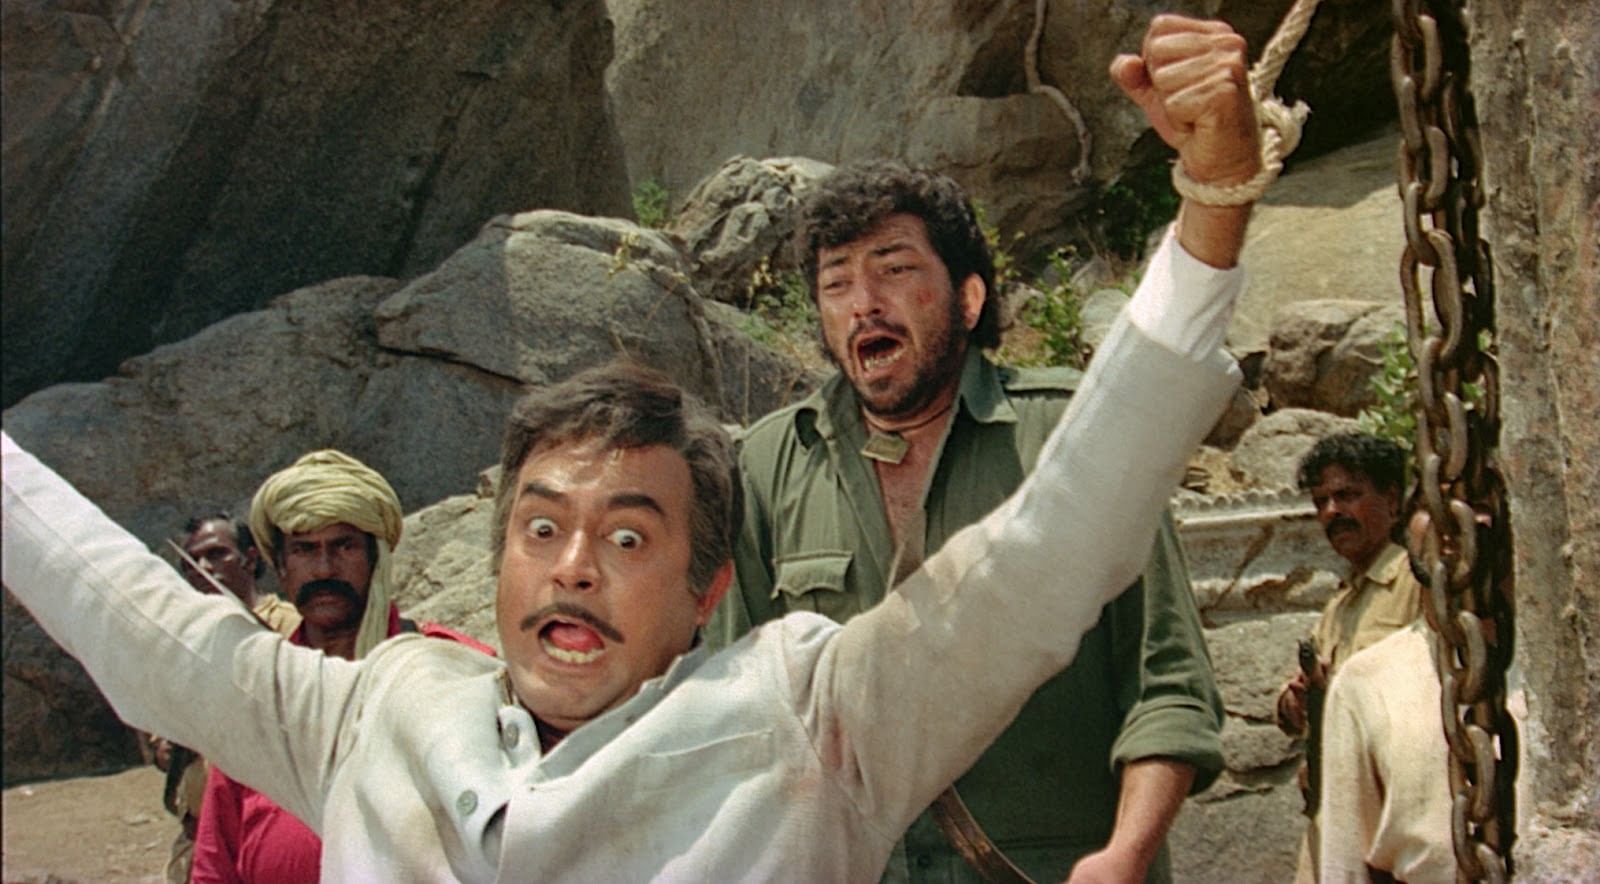 'Sholay' was screenwritten by the Salim-Javed team.